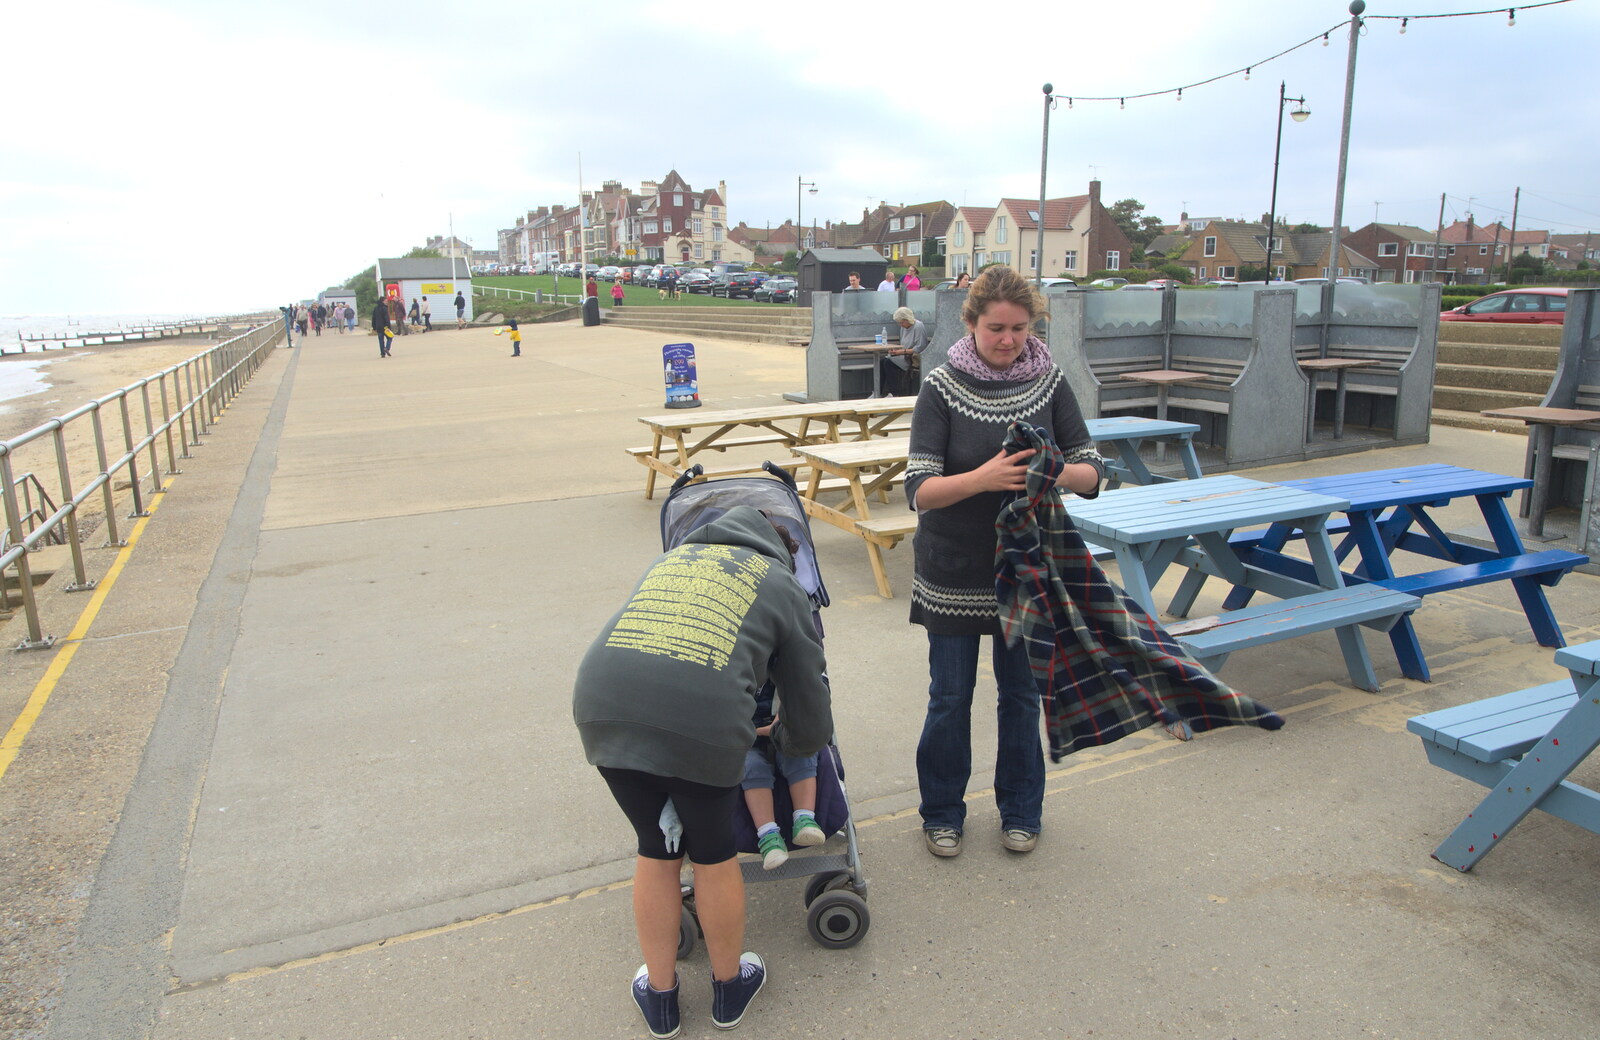 Evelyn installs Harry in his buggy from Southwold By The Sea, Suffolk - 29th September 2013